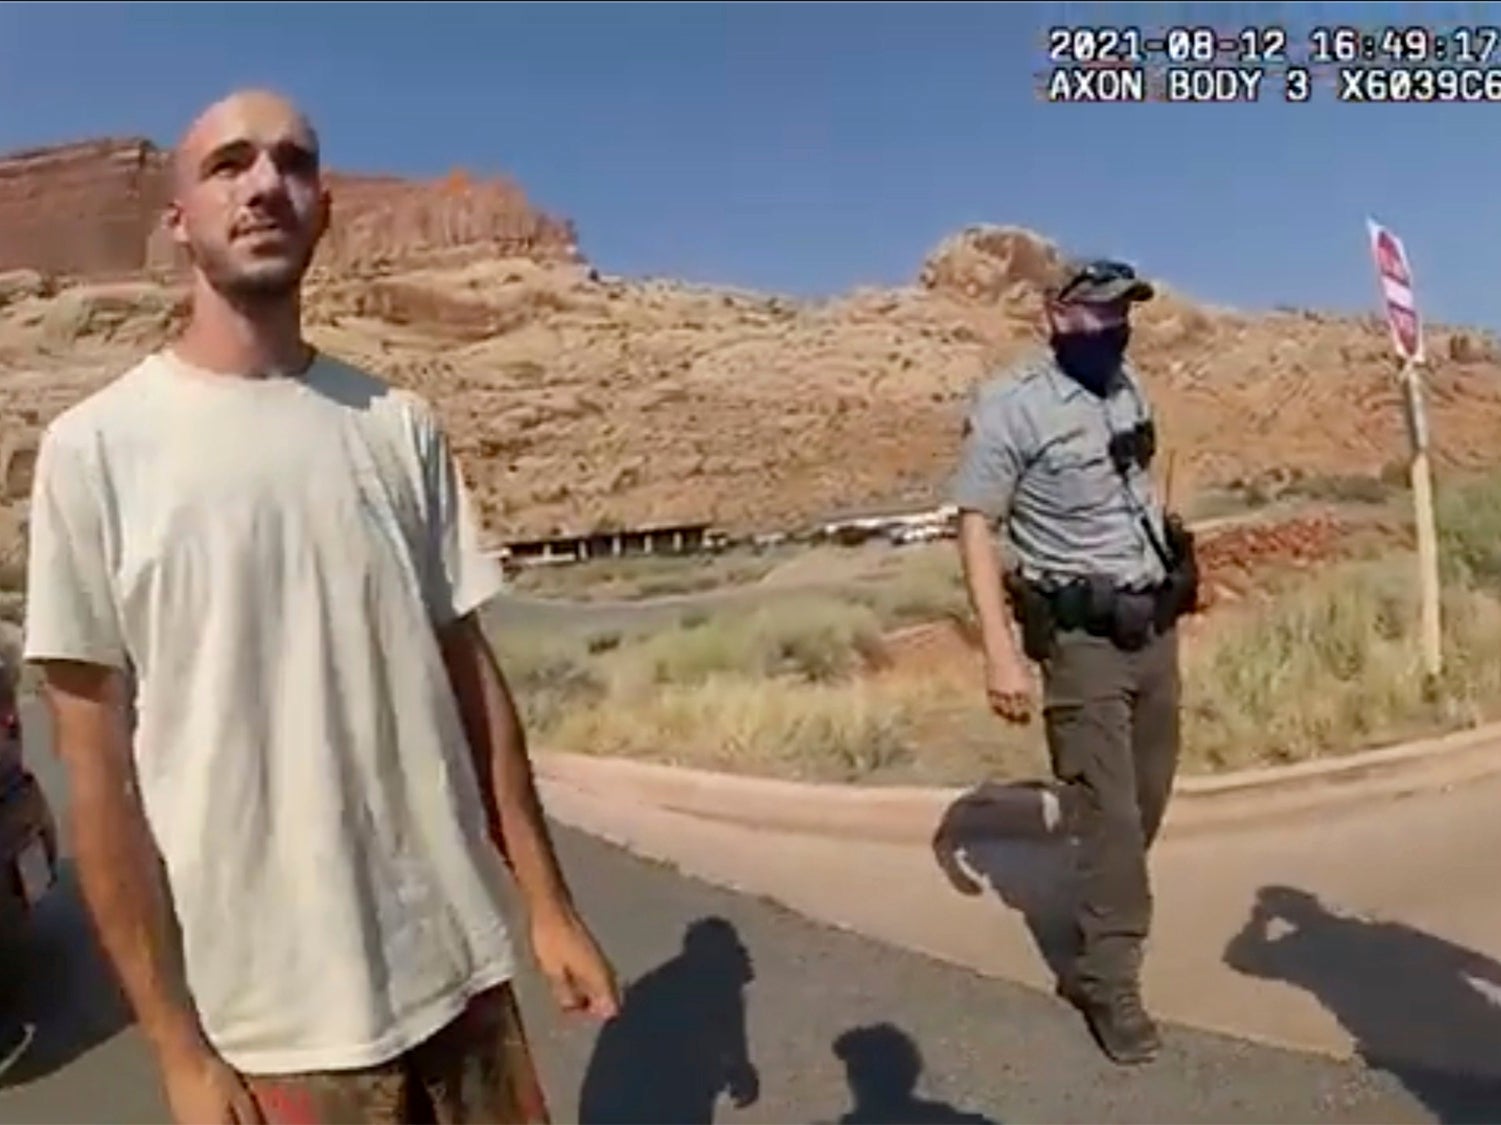 Brian Laundrie is seen in police bodycam during the incident in Moab